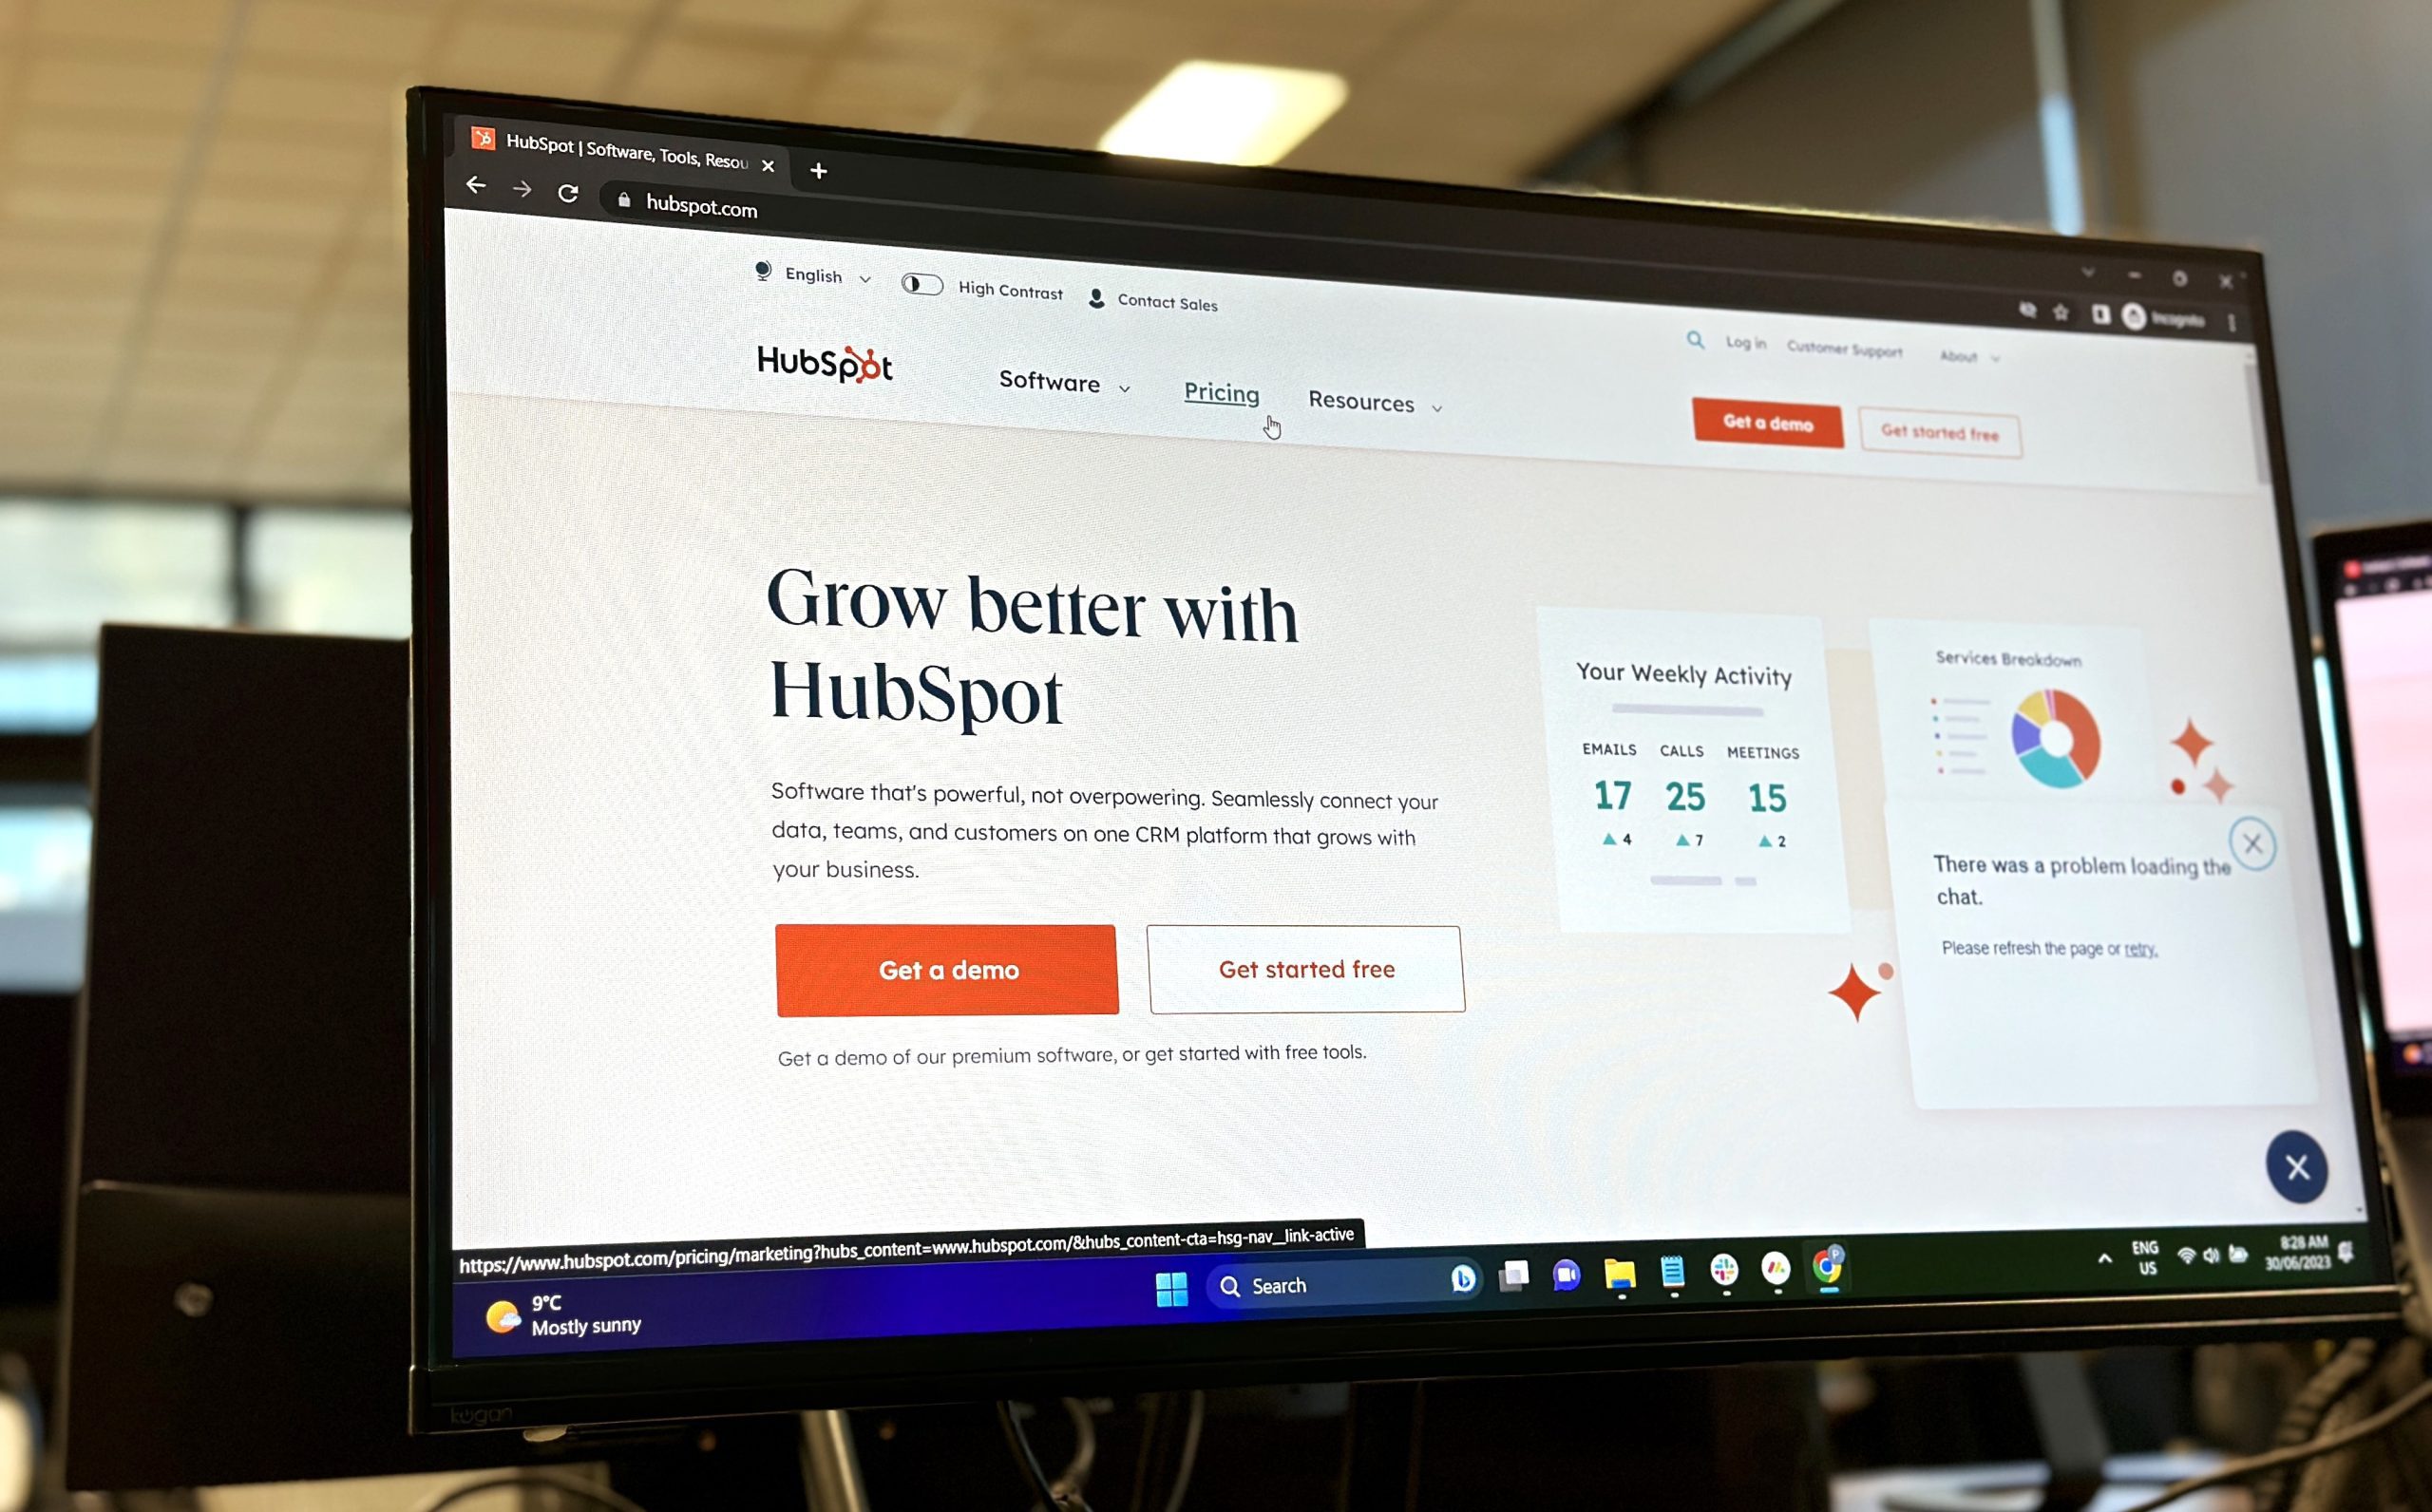 HubSpot homepage displayed on a computer monitor.